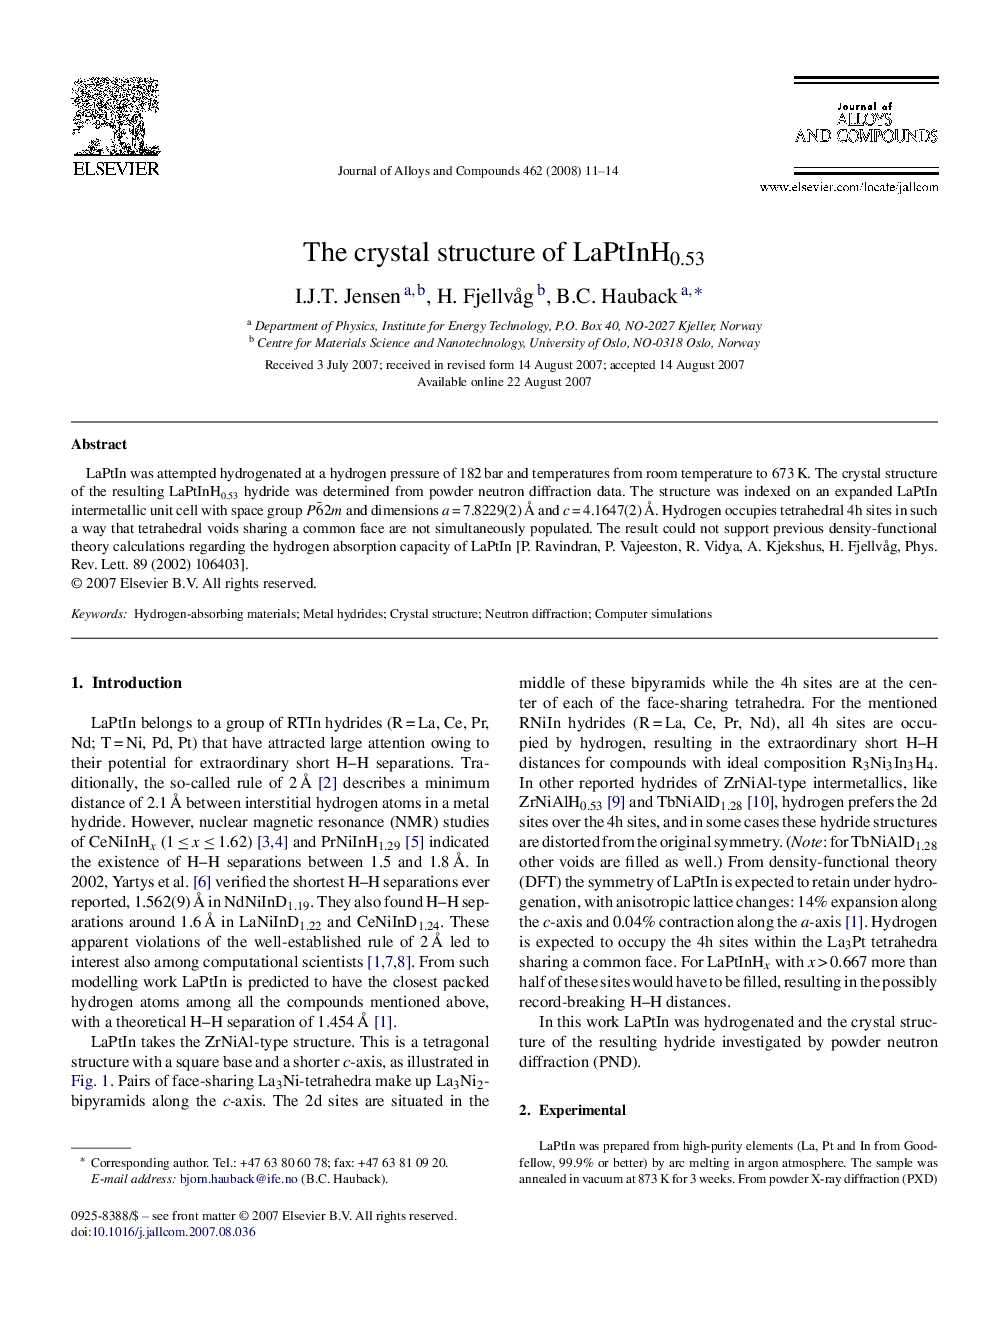 The crystal structure of LaPtInH0.53